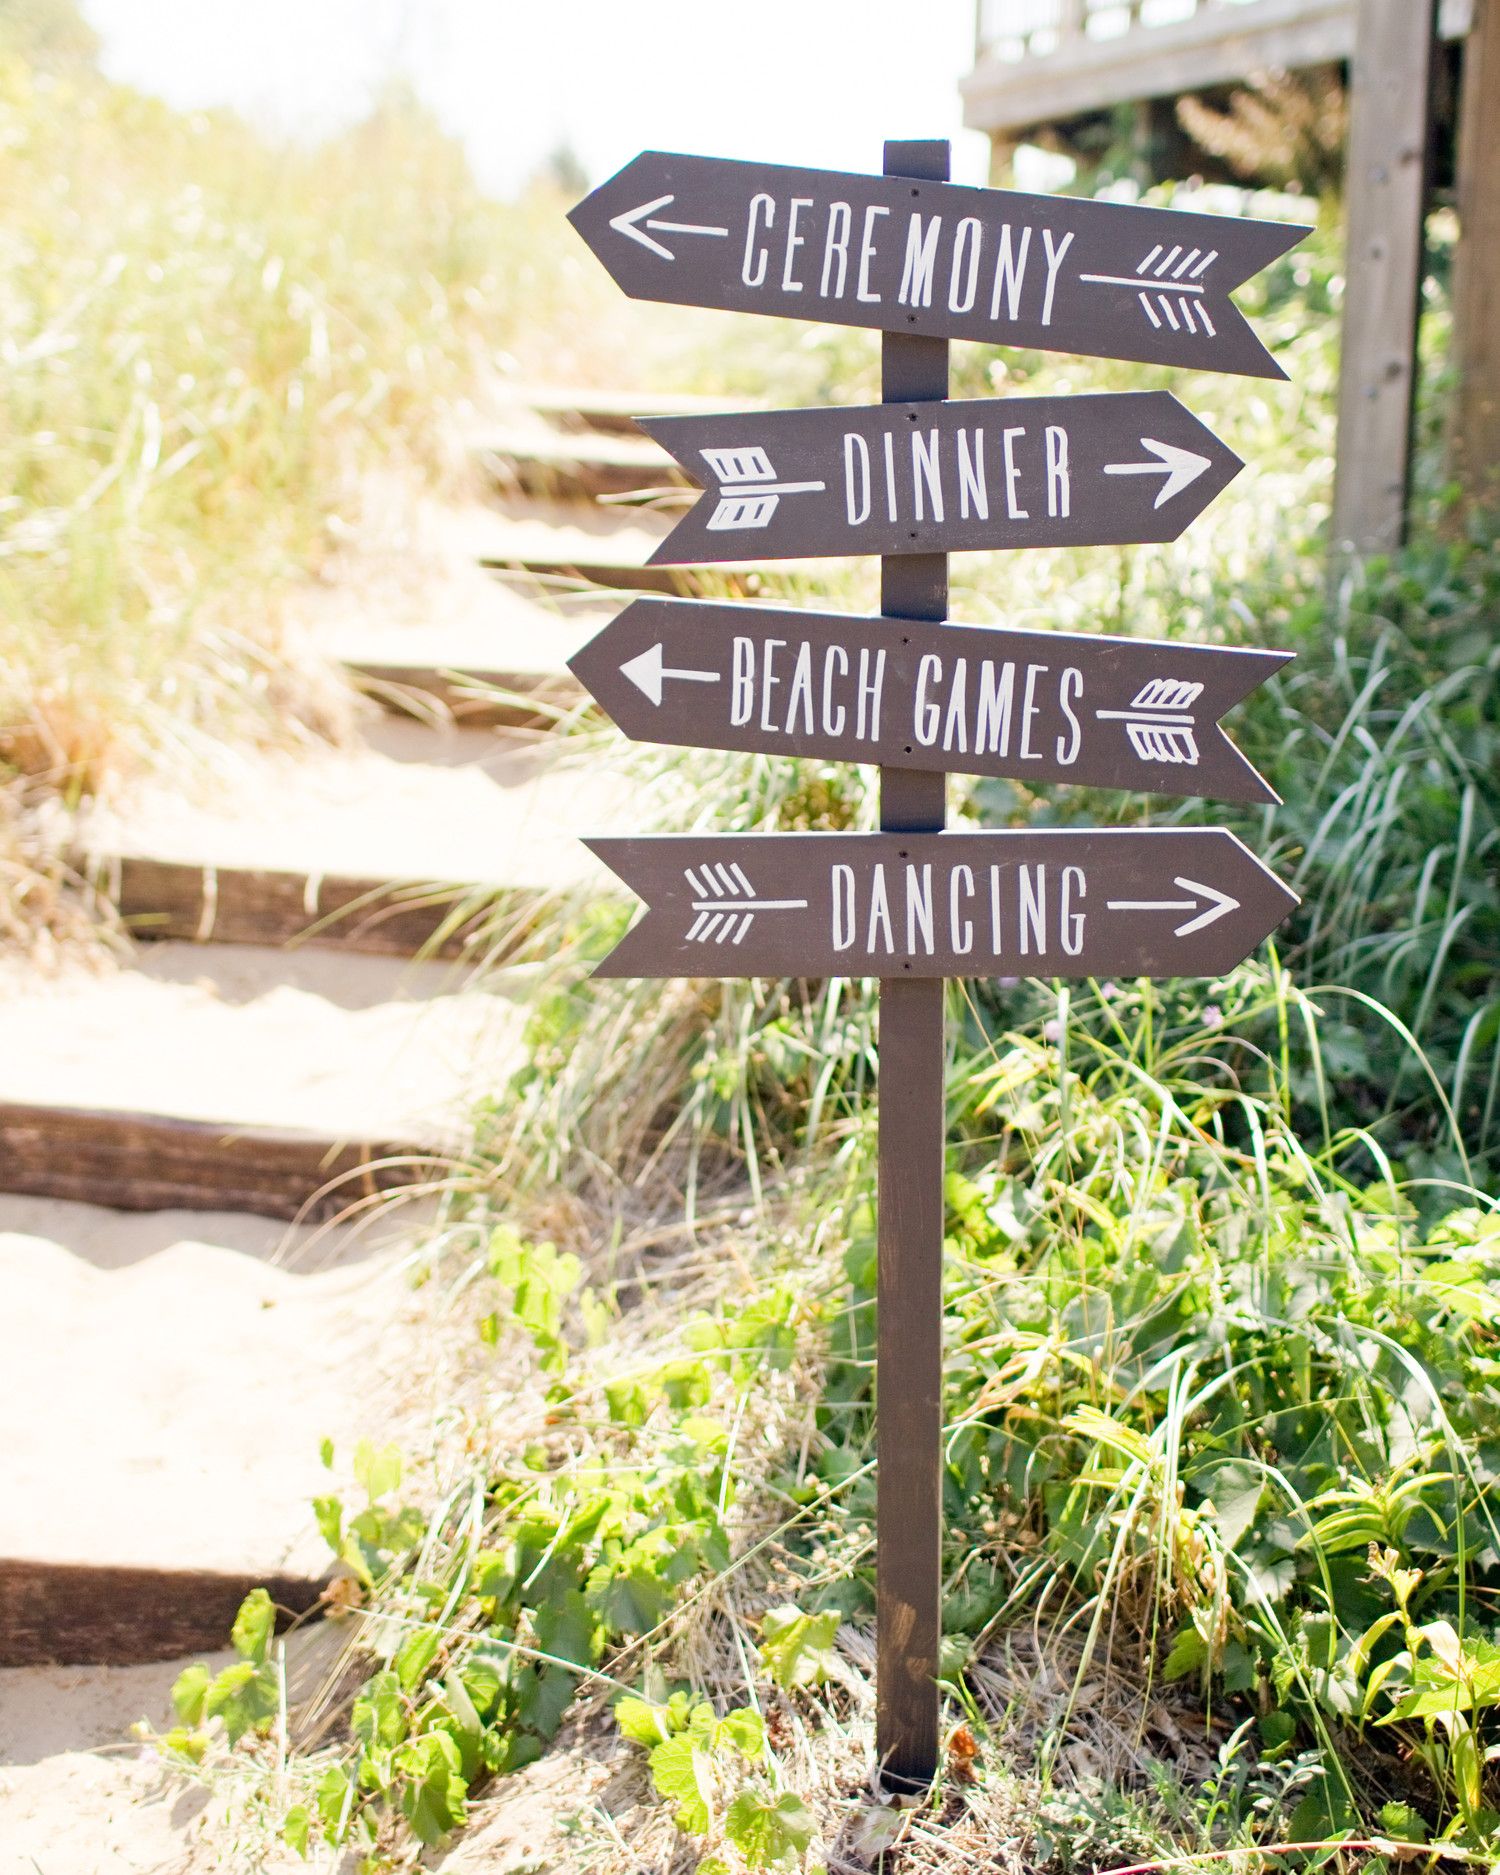 18 Summer Camp Wedding Venues for Kicking Back and Getting Hitched ...